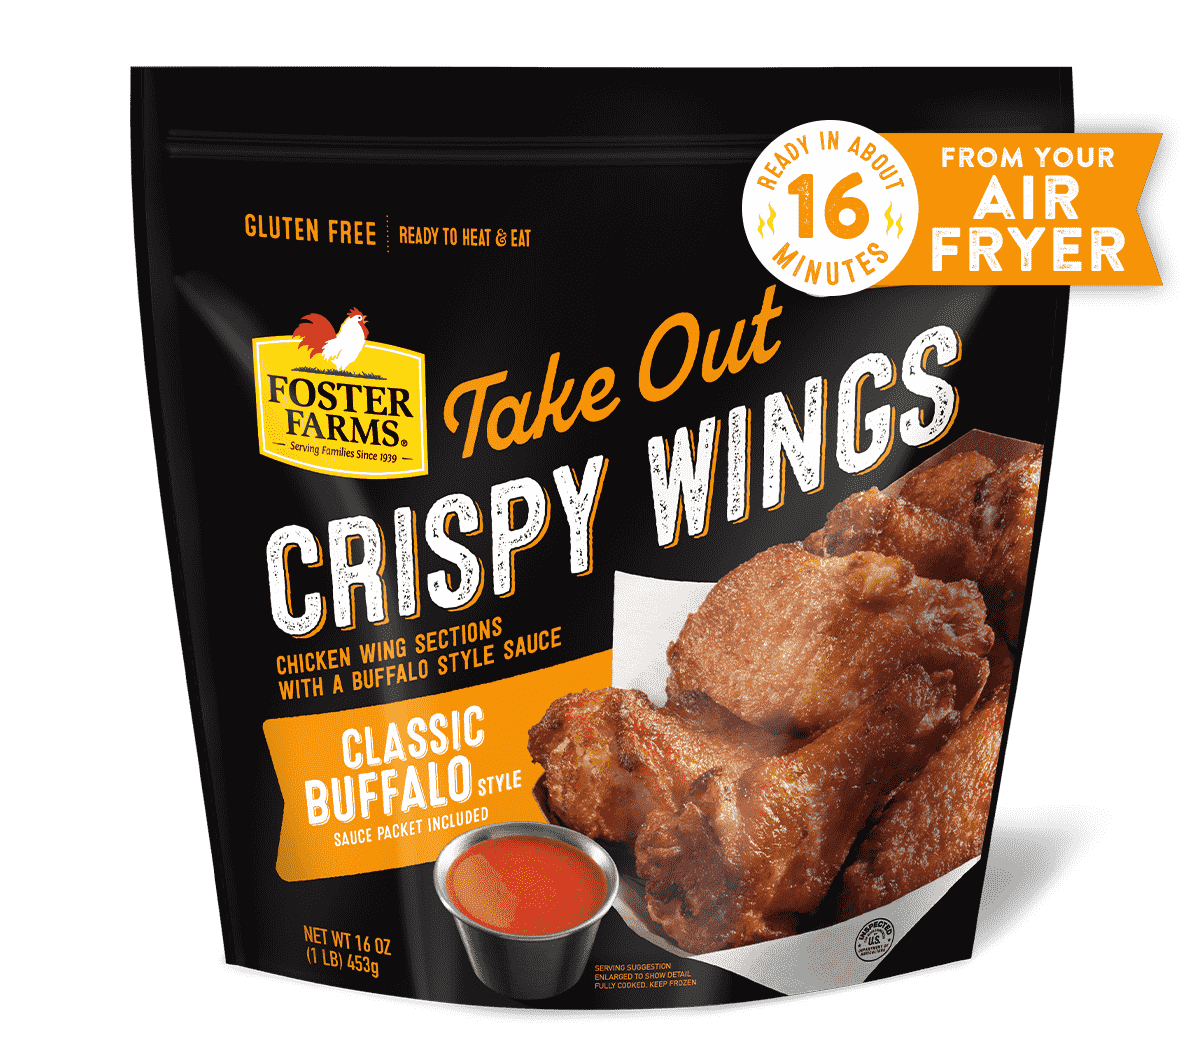 Classic Buffalo Take Out Crispy Wings - Products - Foster Farms